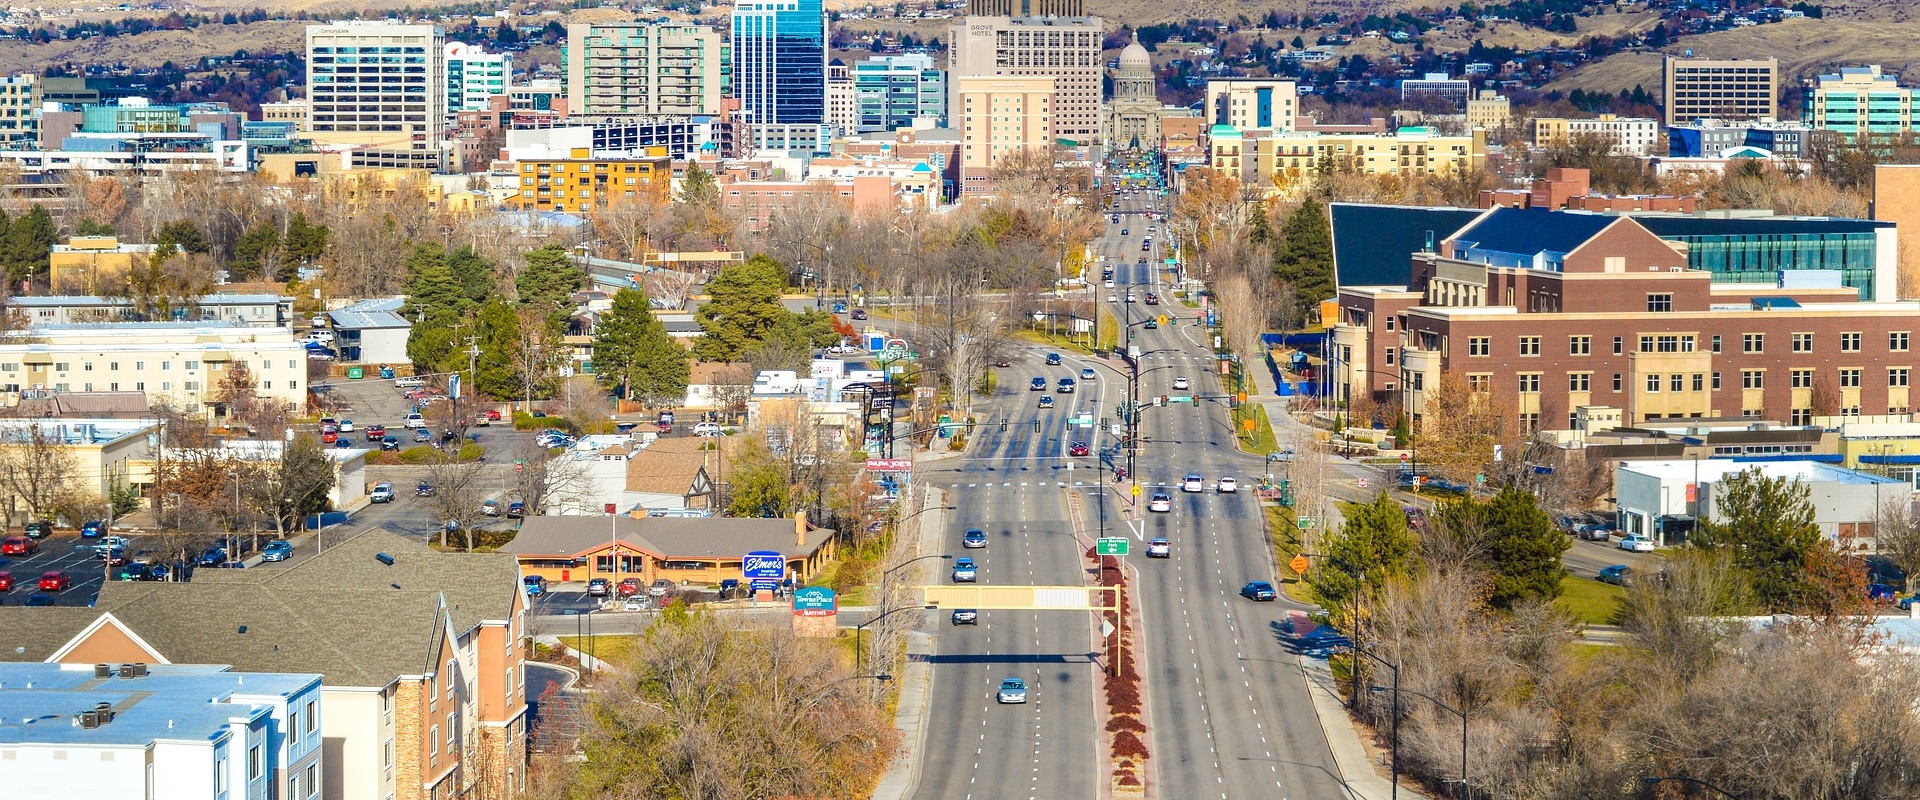 What is boise well known for?